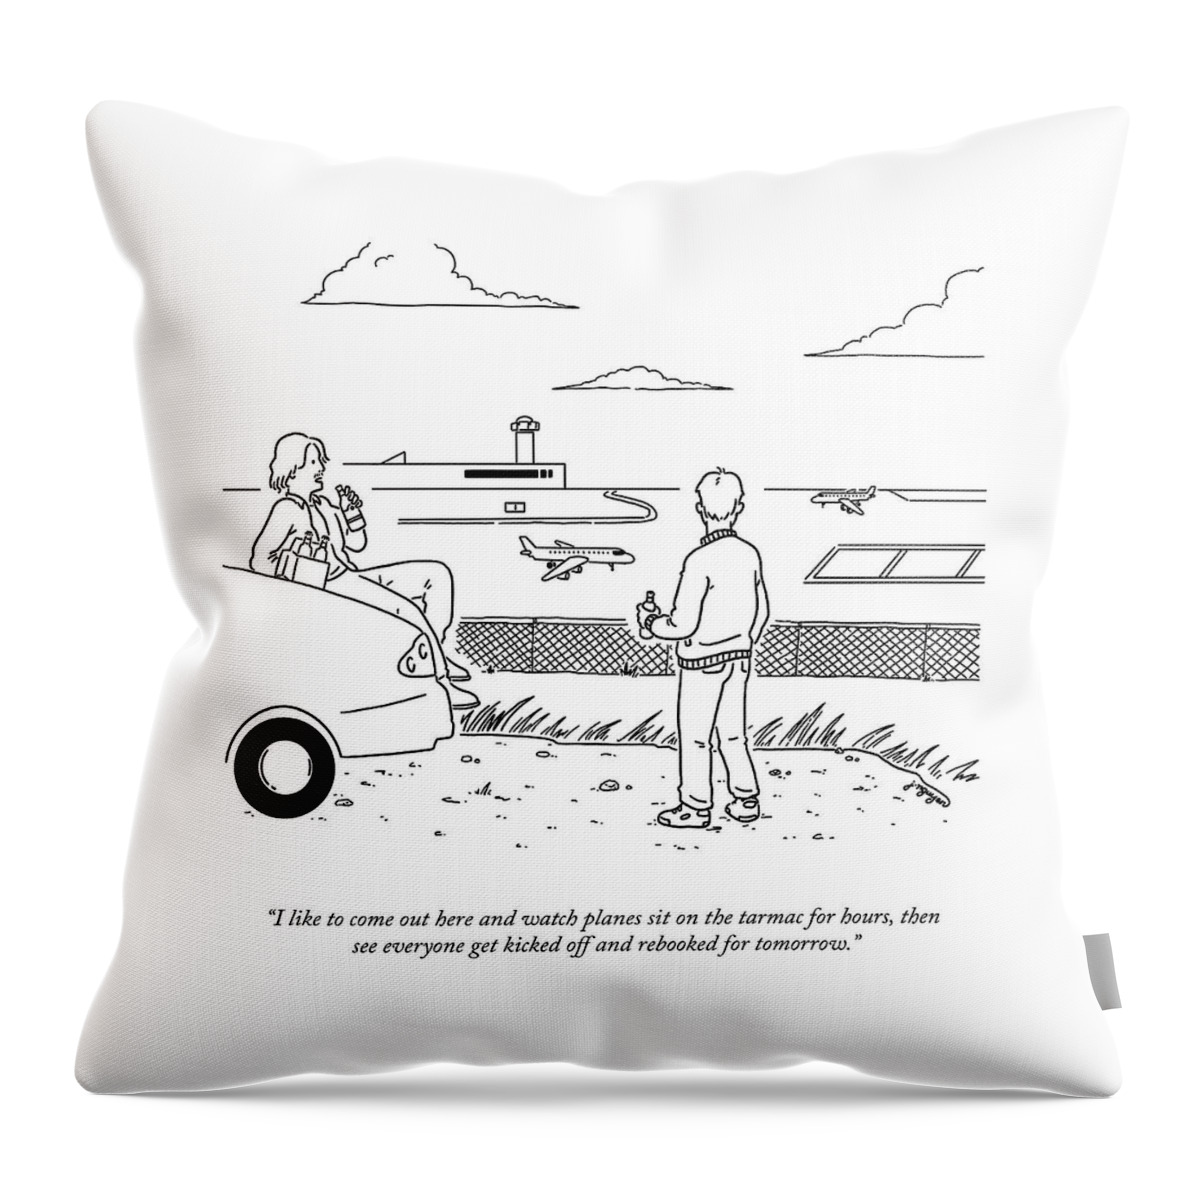 Watch Planes Sit On The Tarmac Throw Pillow